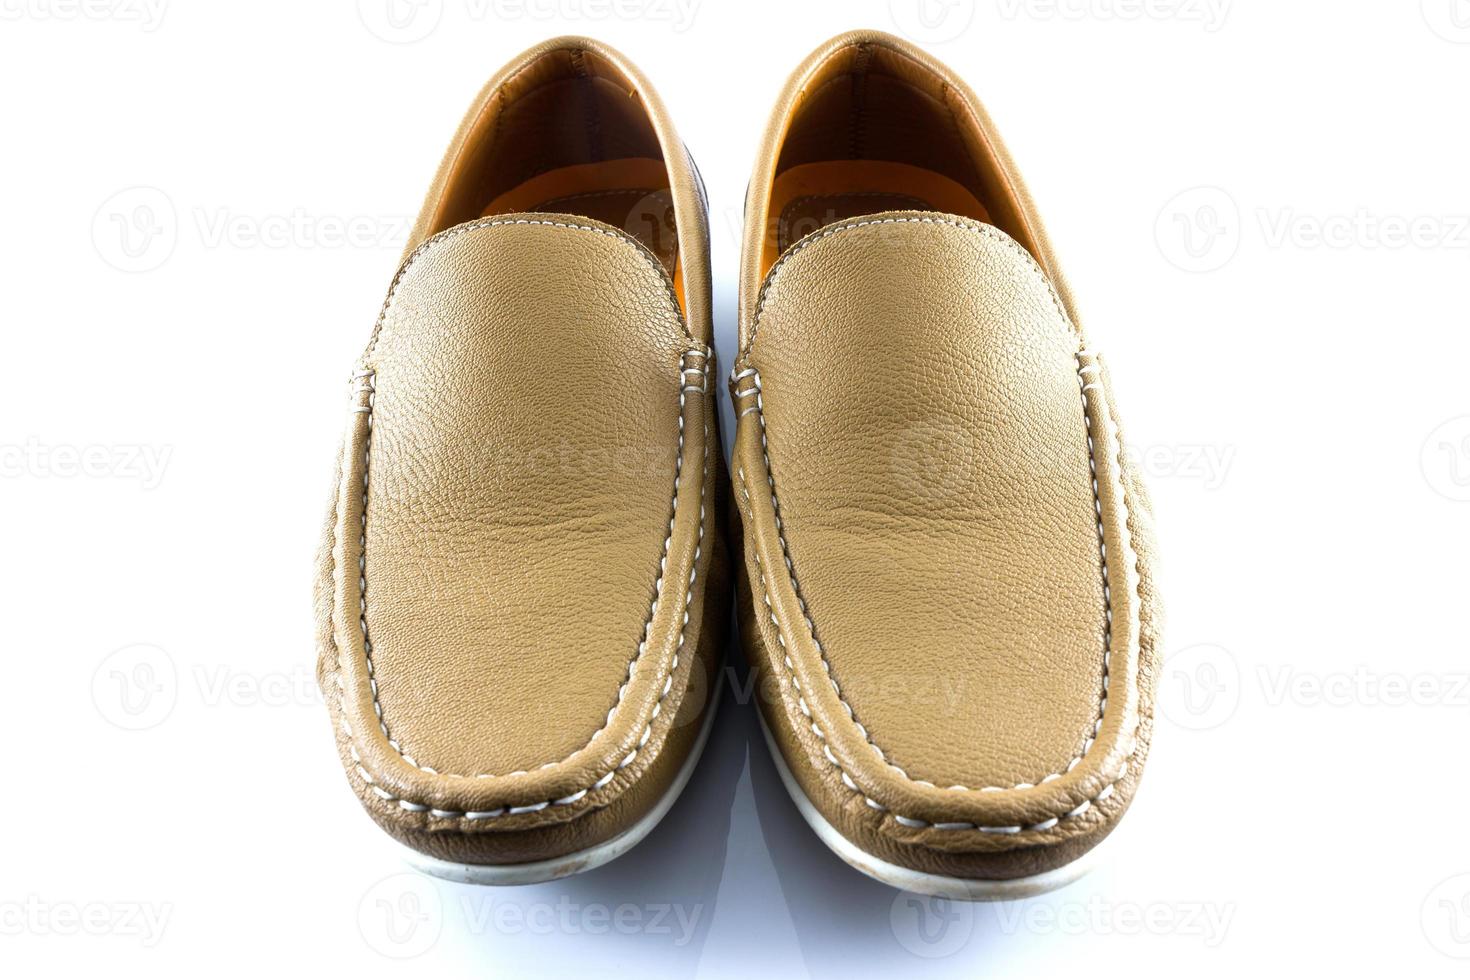 Men's classic leather brow shoes photo